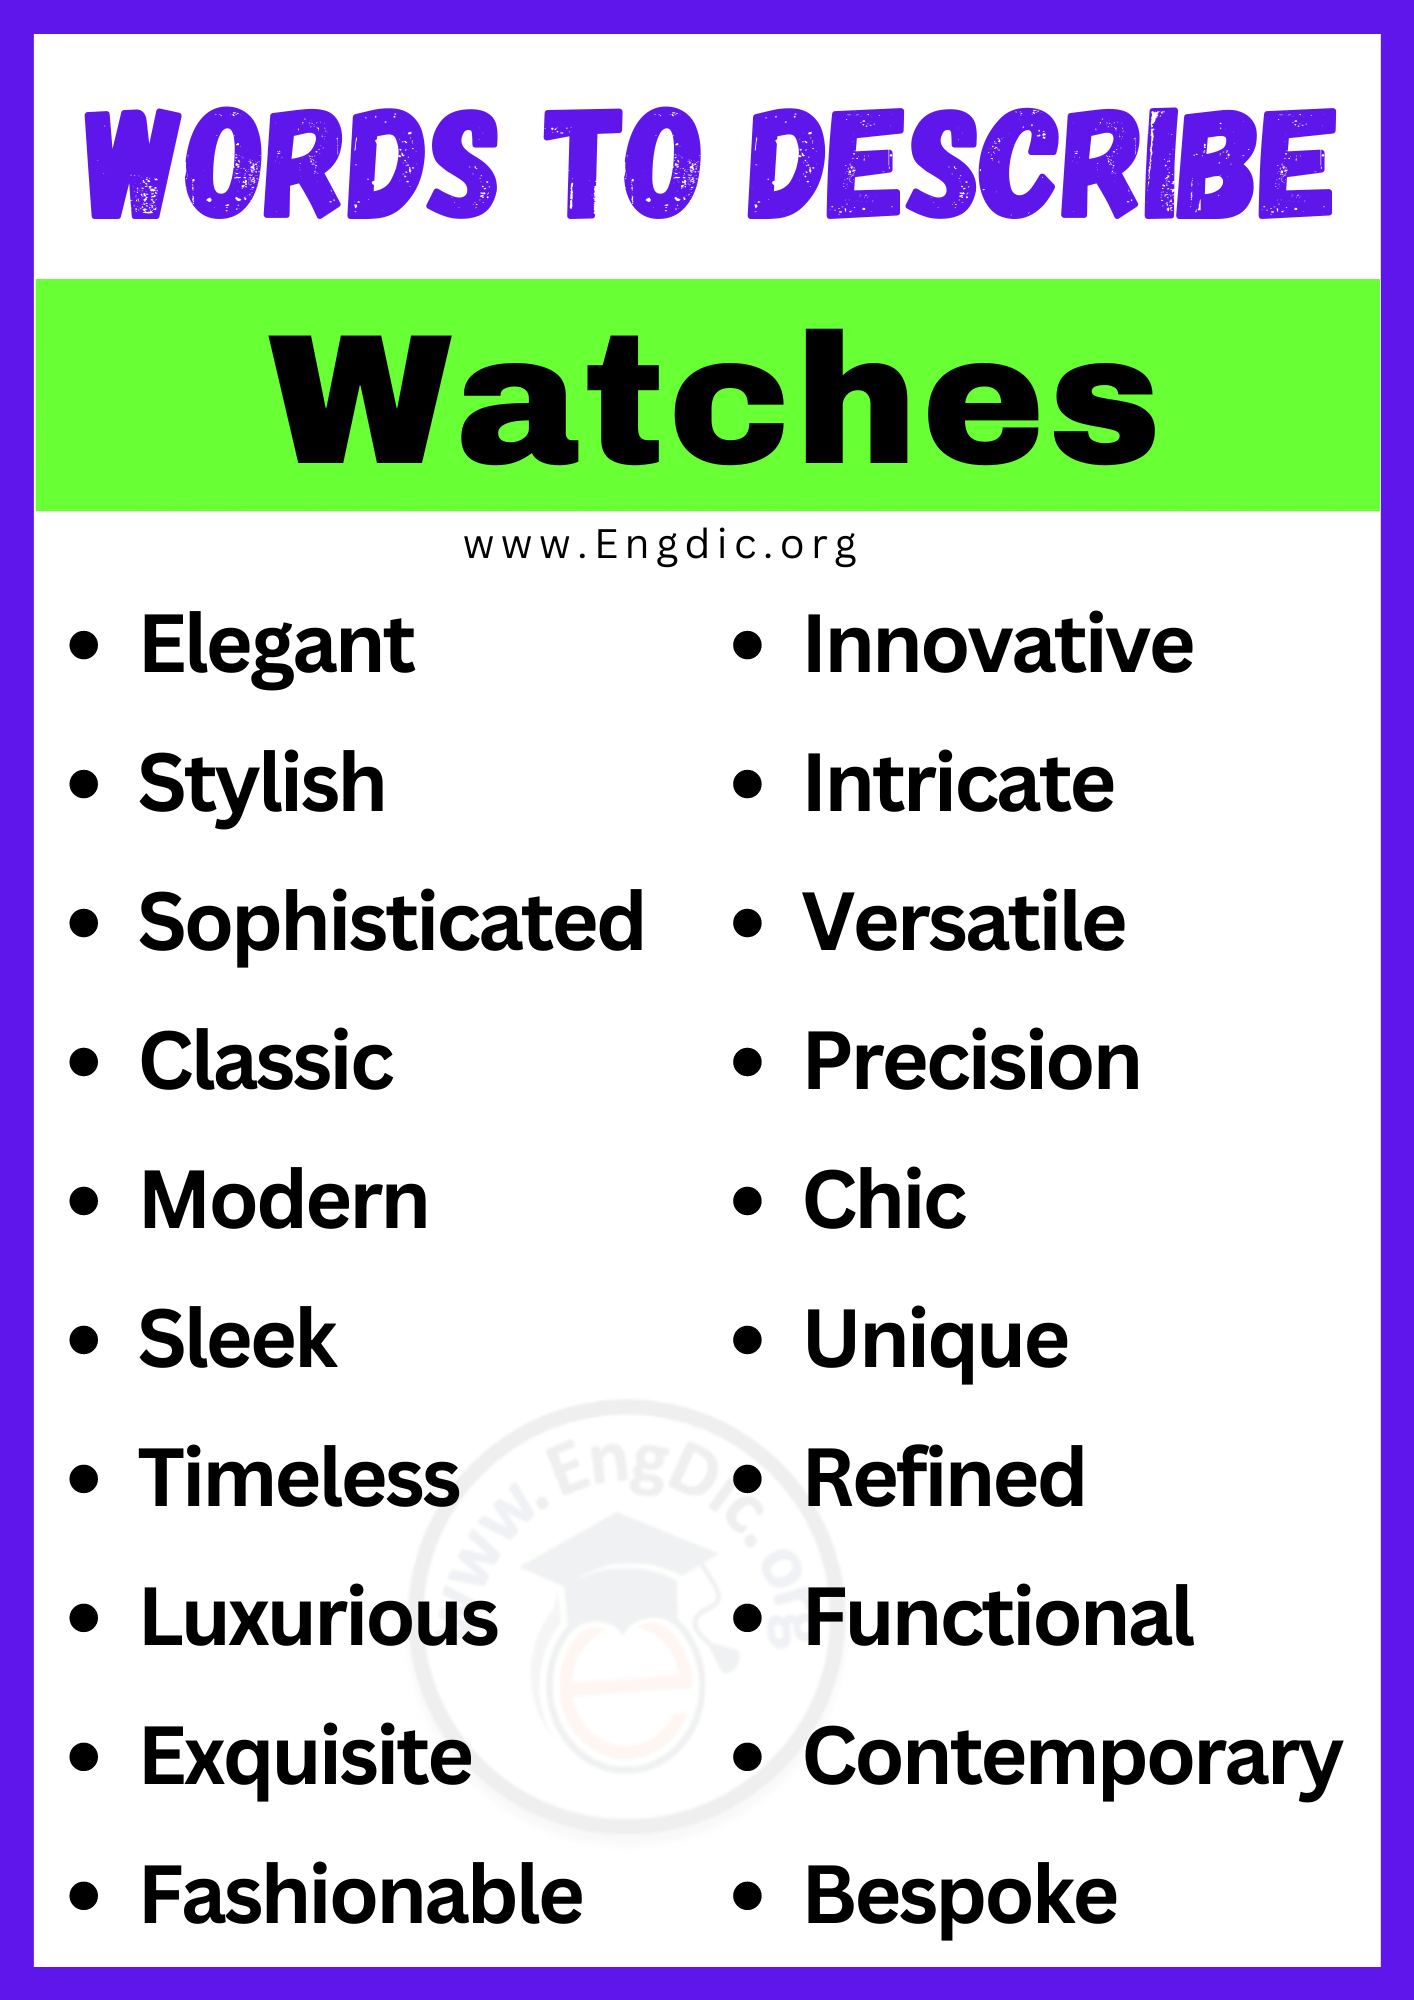 Words to Describe Watches